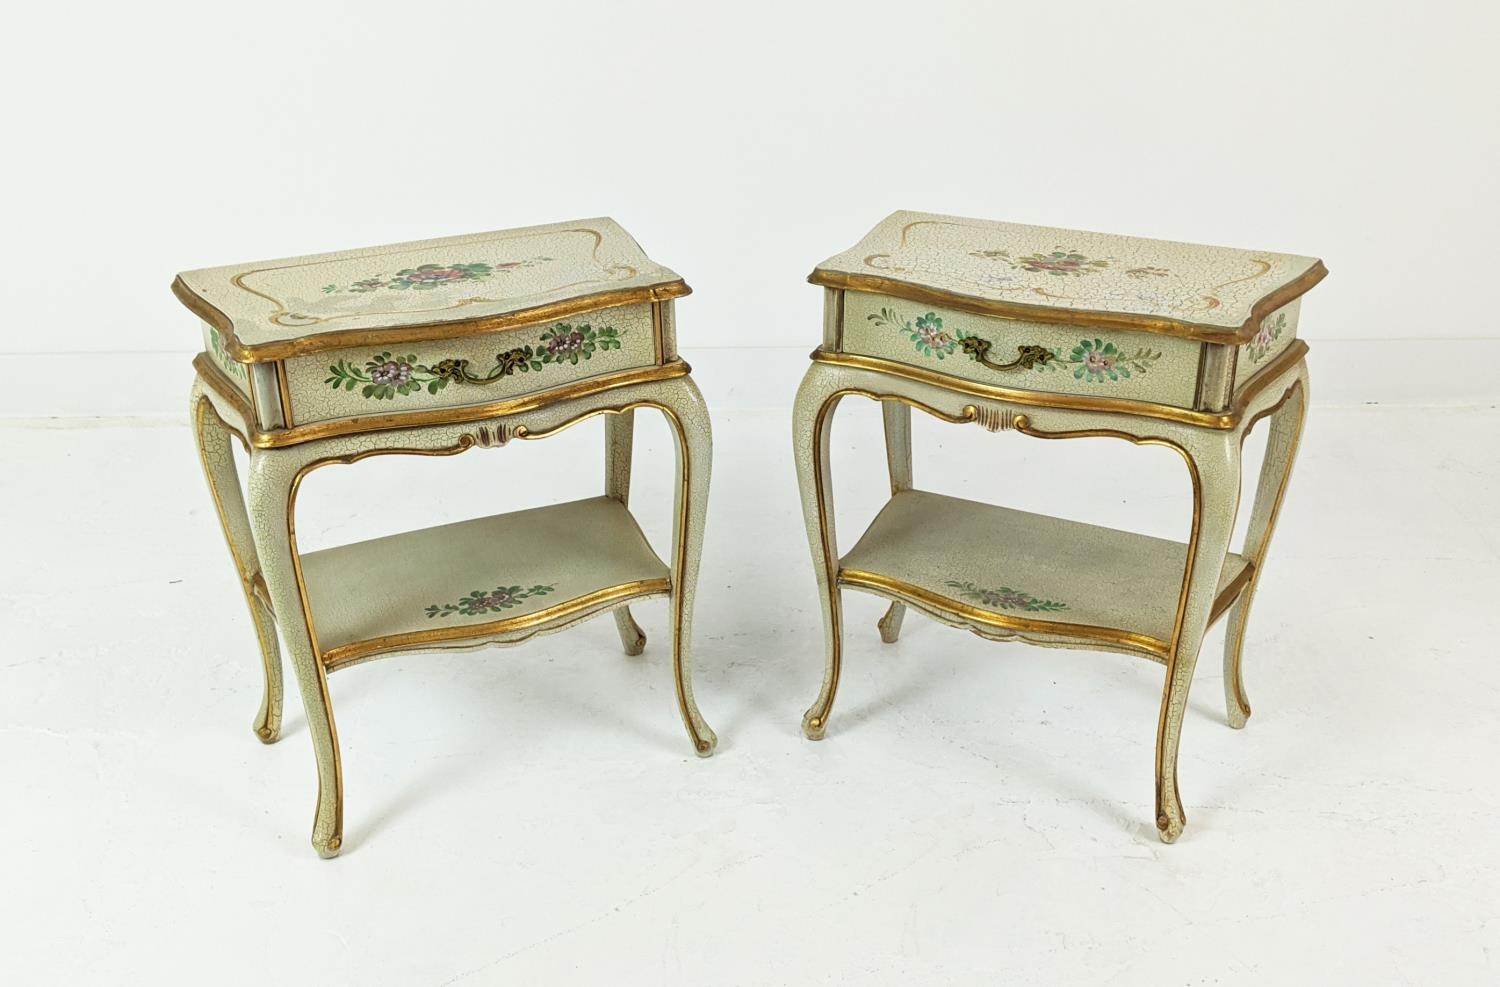 SERPENTINE BEDSIDE TABLES, Italianate craquelure, floral painted and gilt heightened, each with